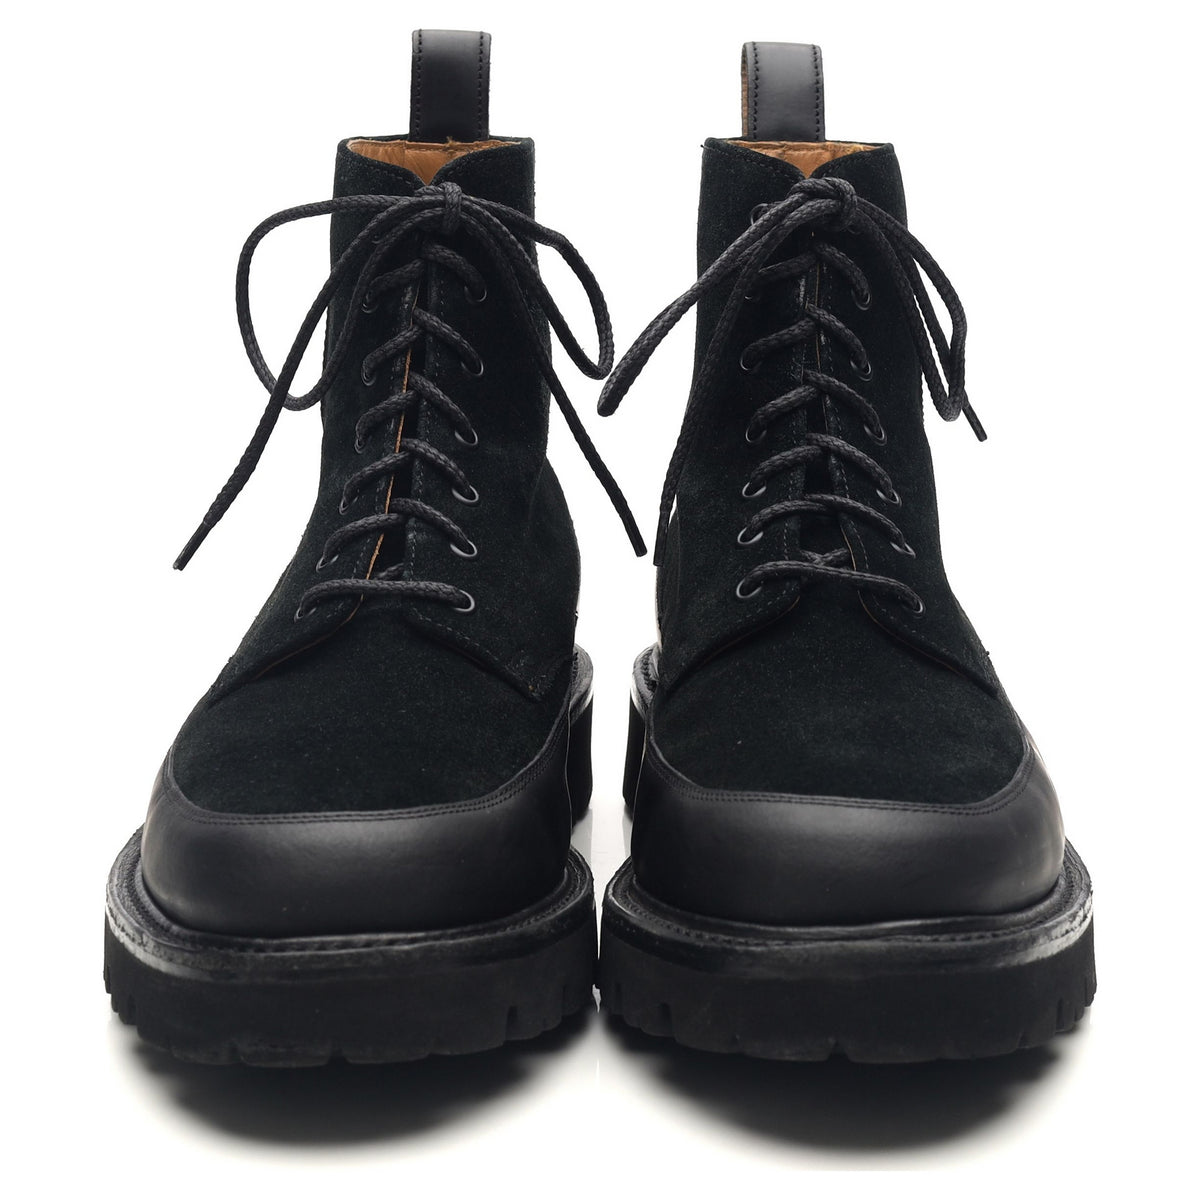 Black Leather Boots UK 6.5 G